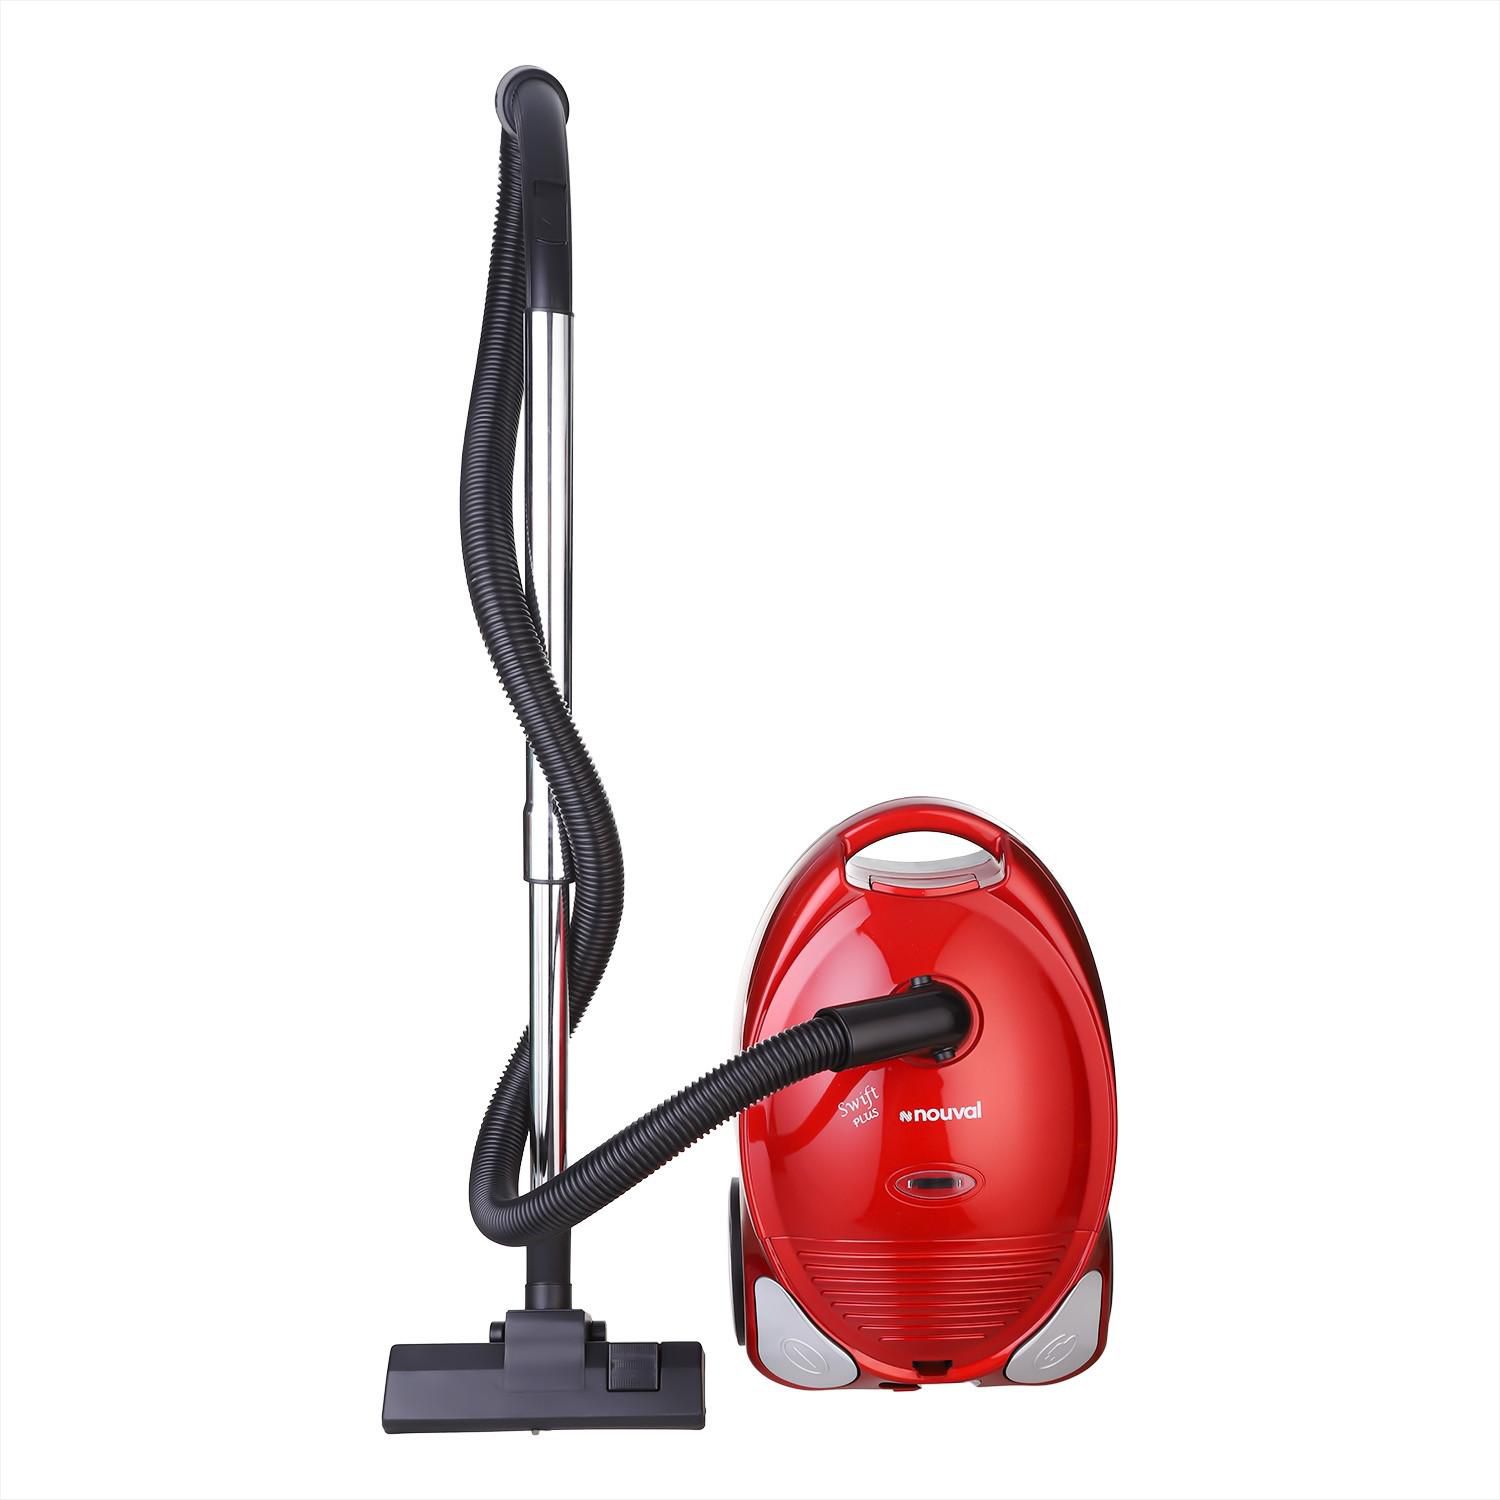 Get Nouval Swift Plus Vacuum Cleaner, 1800 W - Black with best offers shop online | cash on delivery | Raneen.com